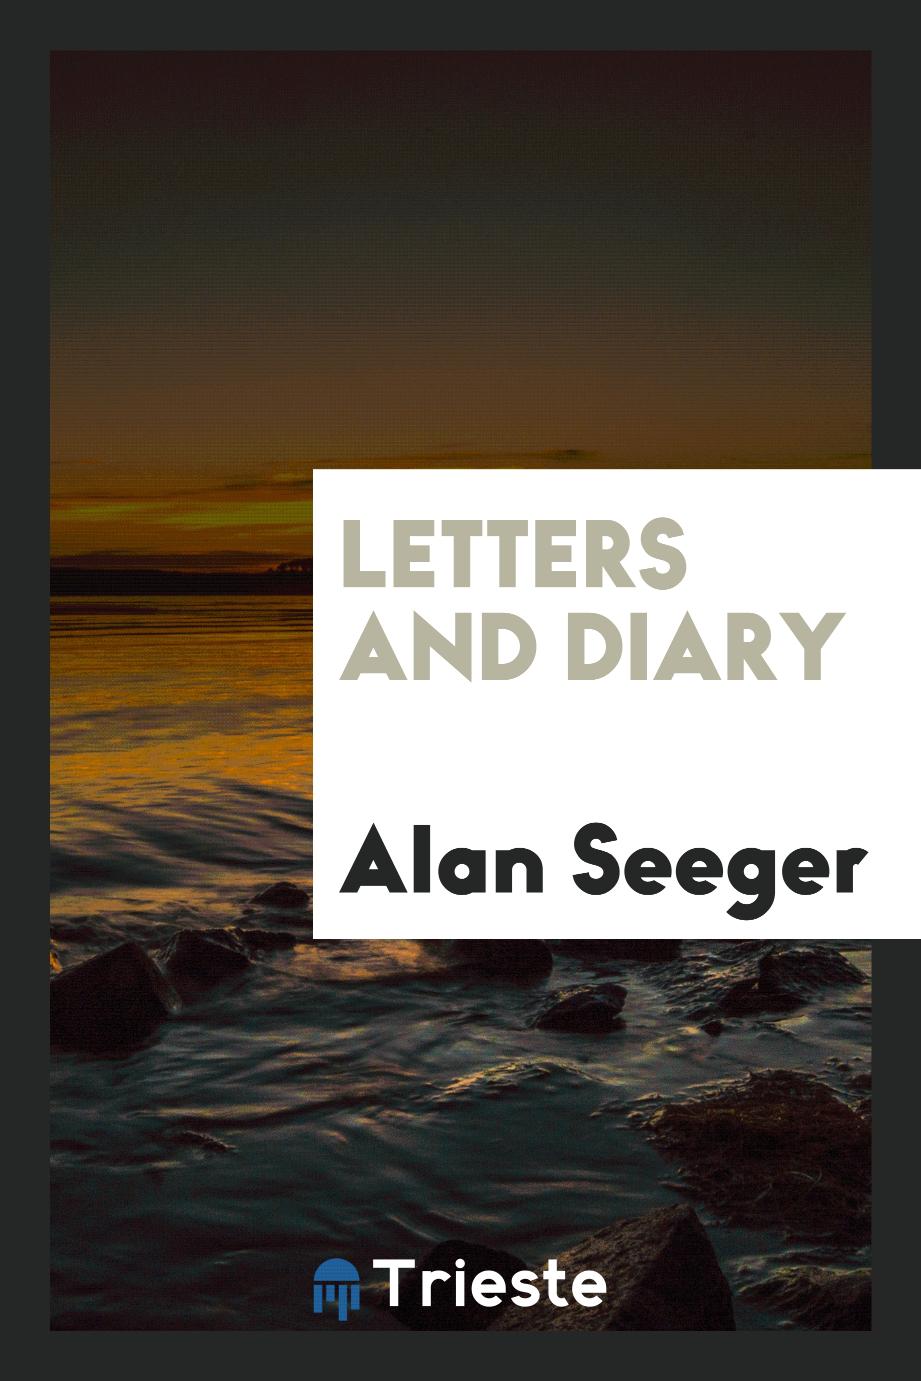 Alan Seeger - Letters and diary